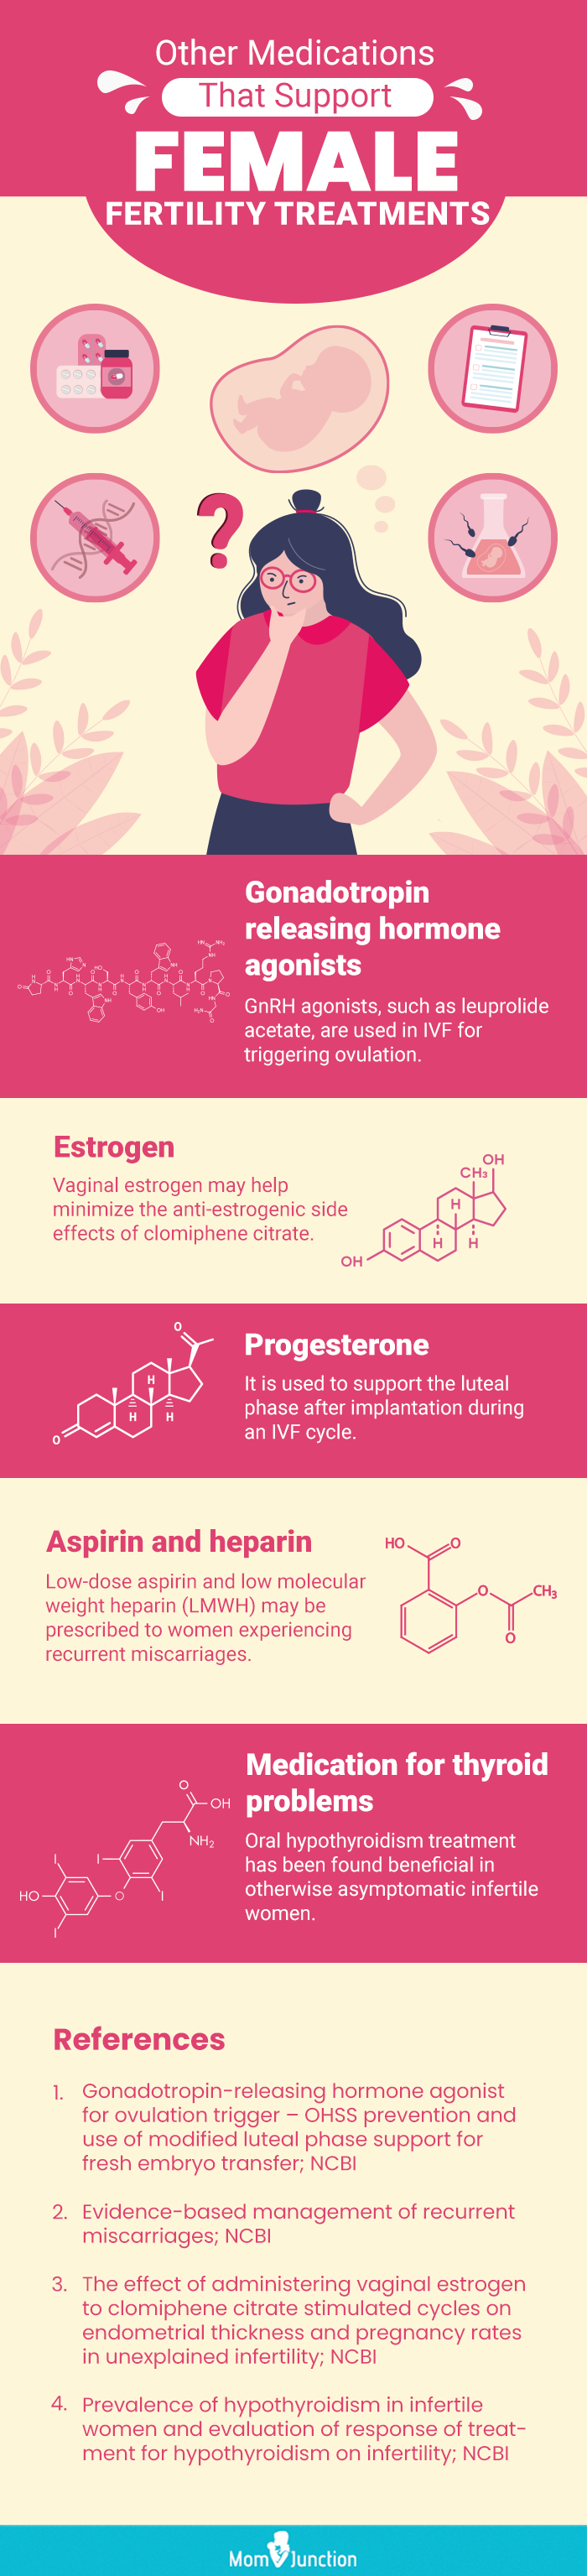 other medications that support female fertility treatments (infographic)